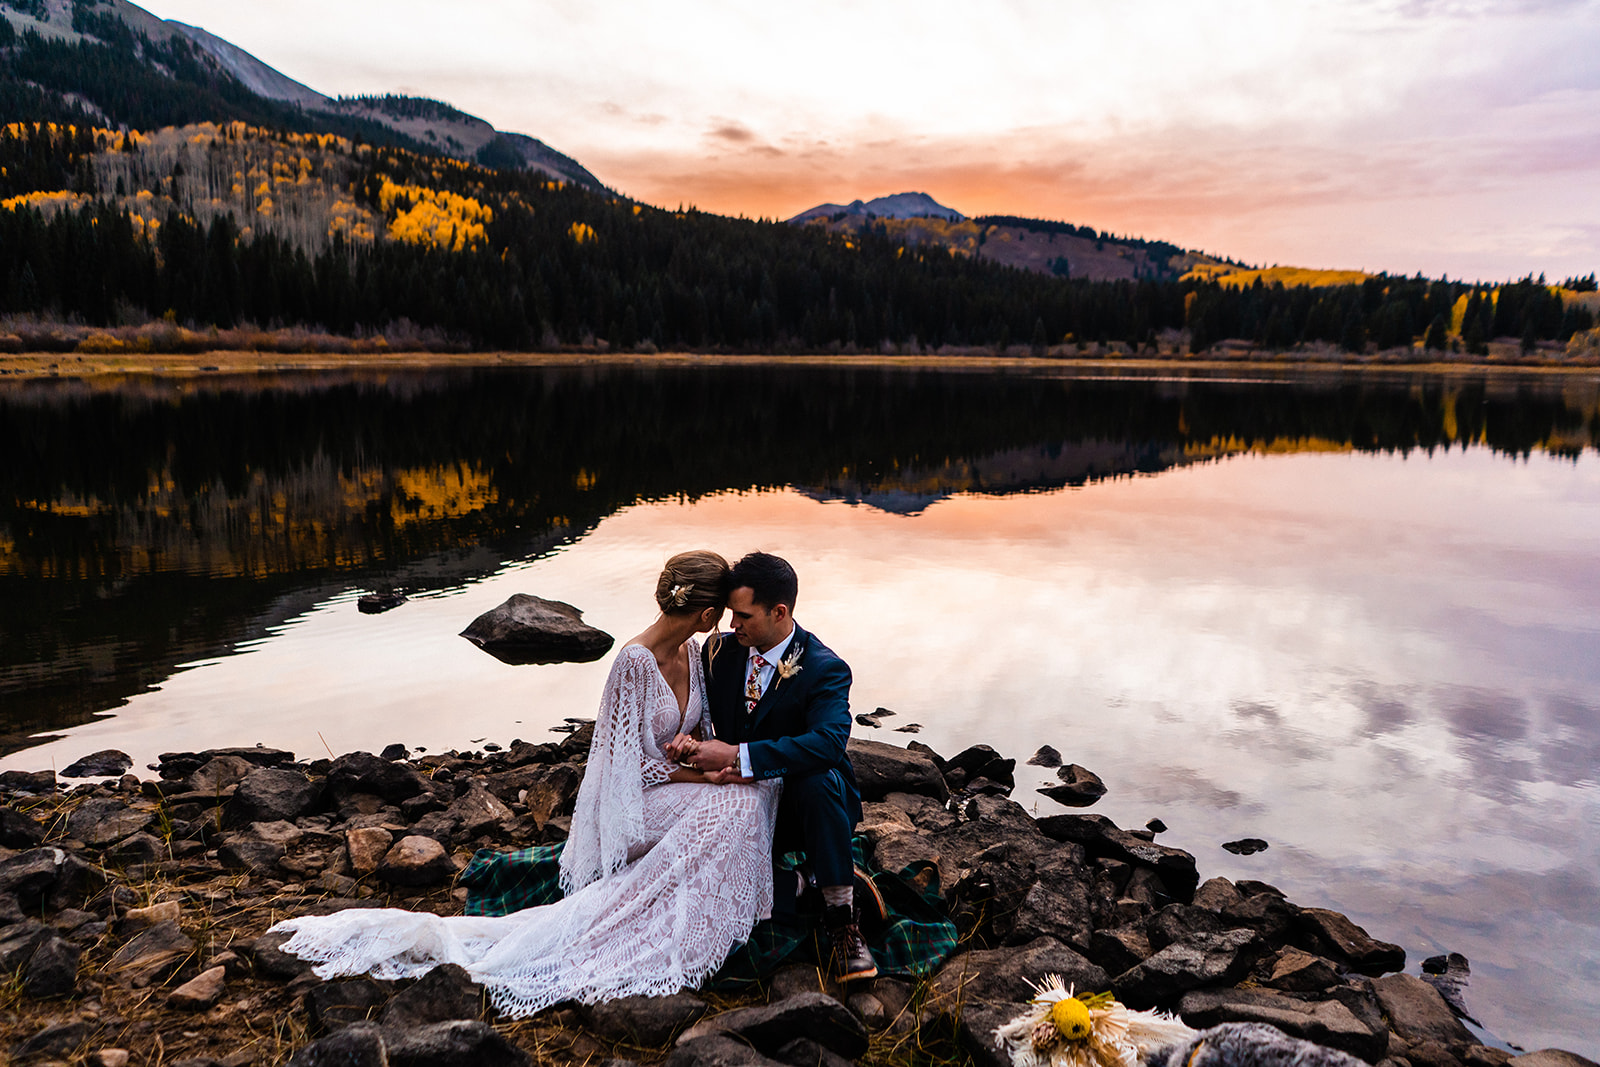 Bride and groom portraits taken during the sunset at Crested Butte for their Fall Elopement